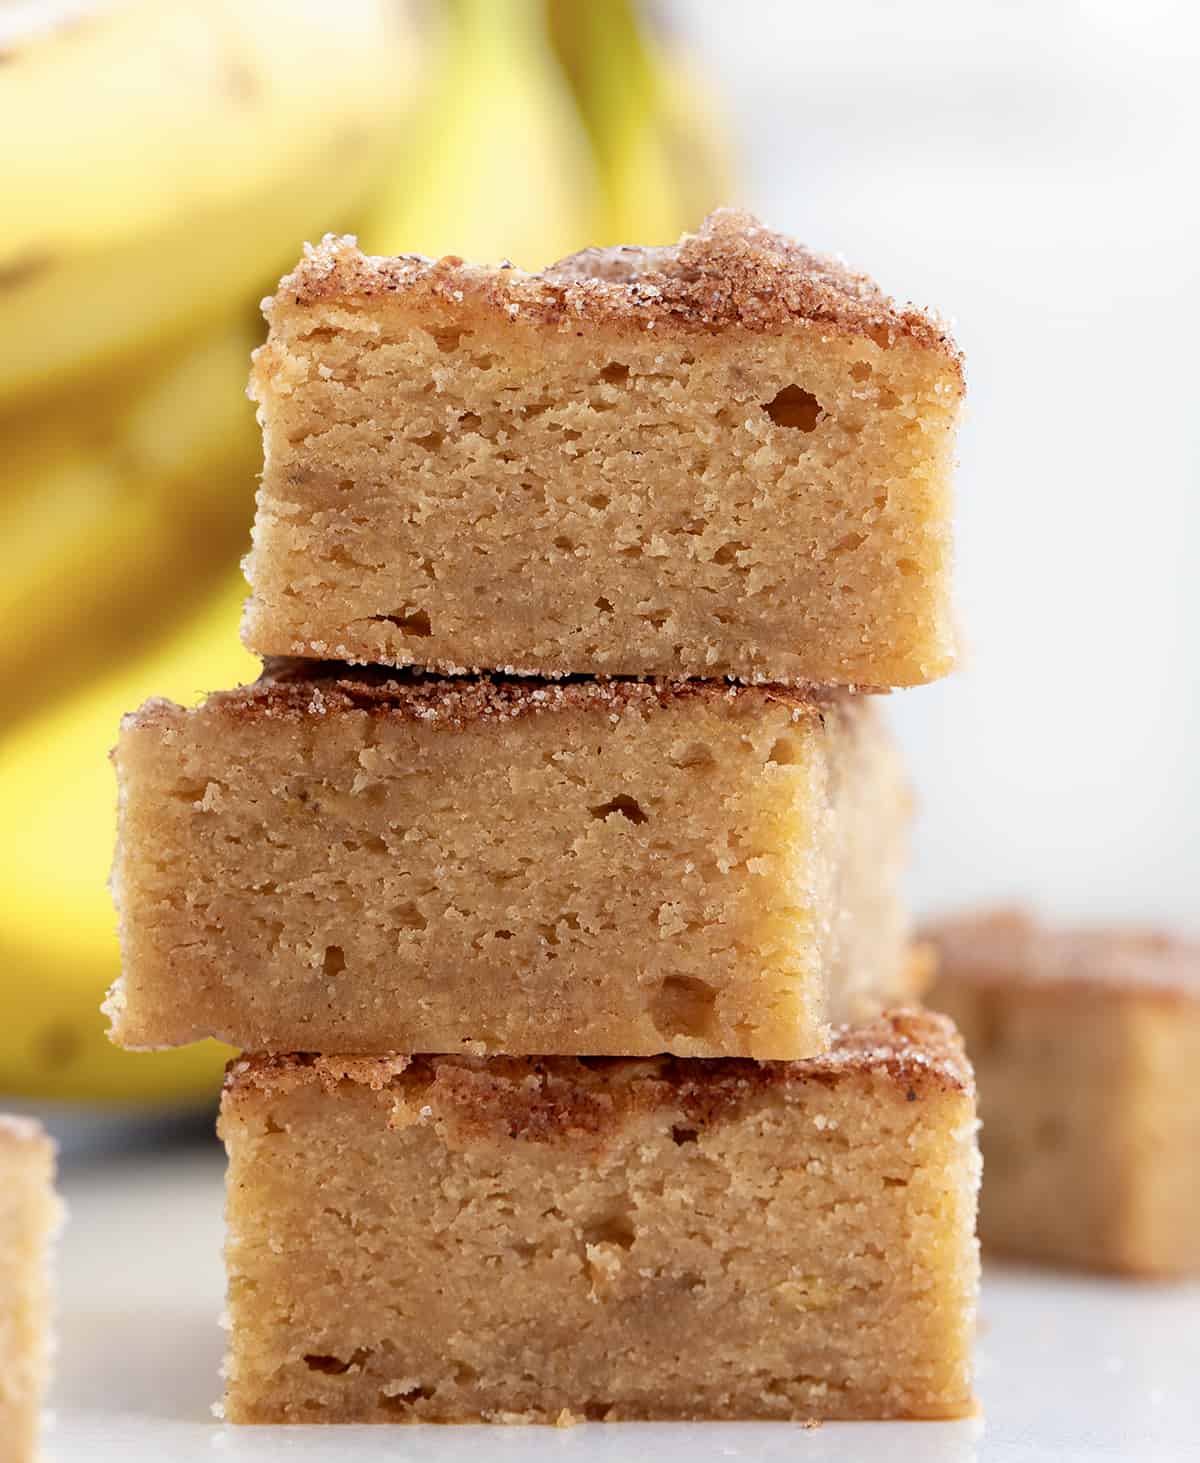 Stack of Banana Snickerdoodle Bars in Front of Bananas.